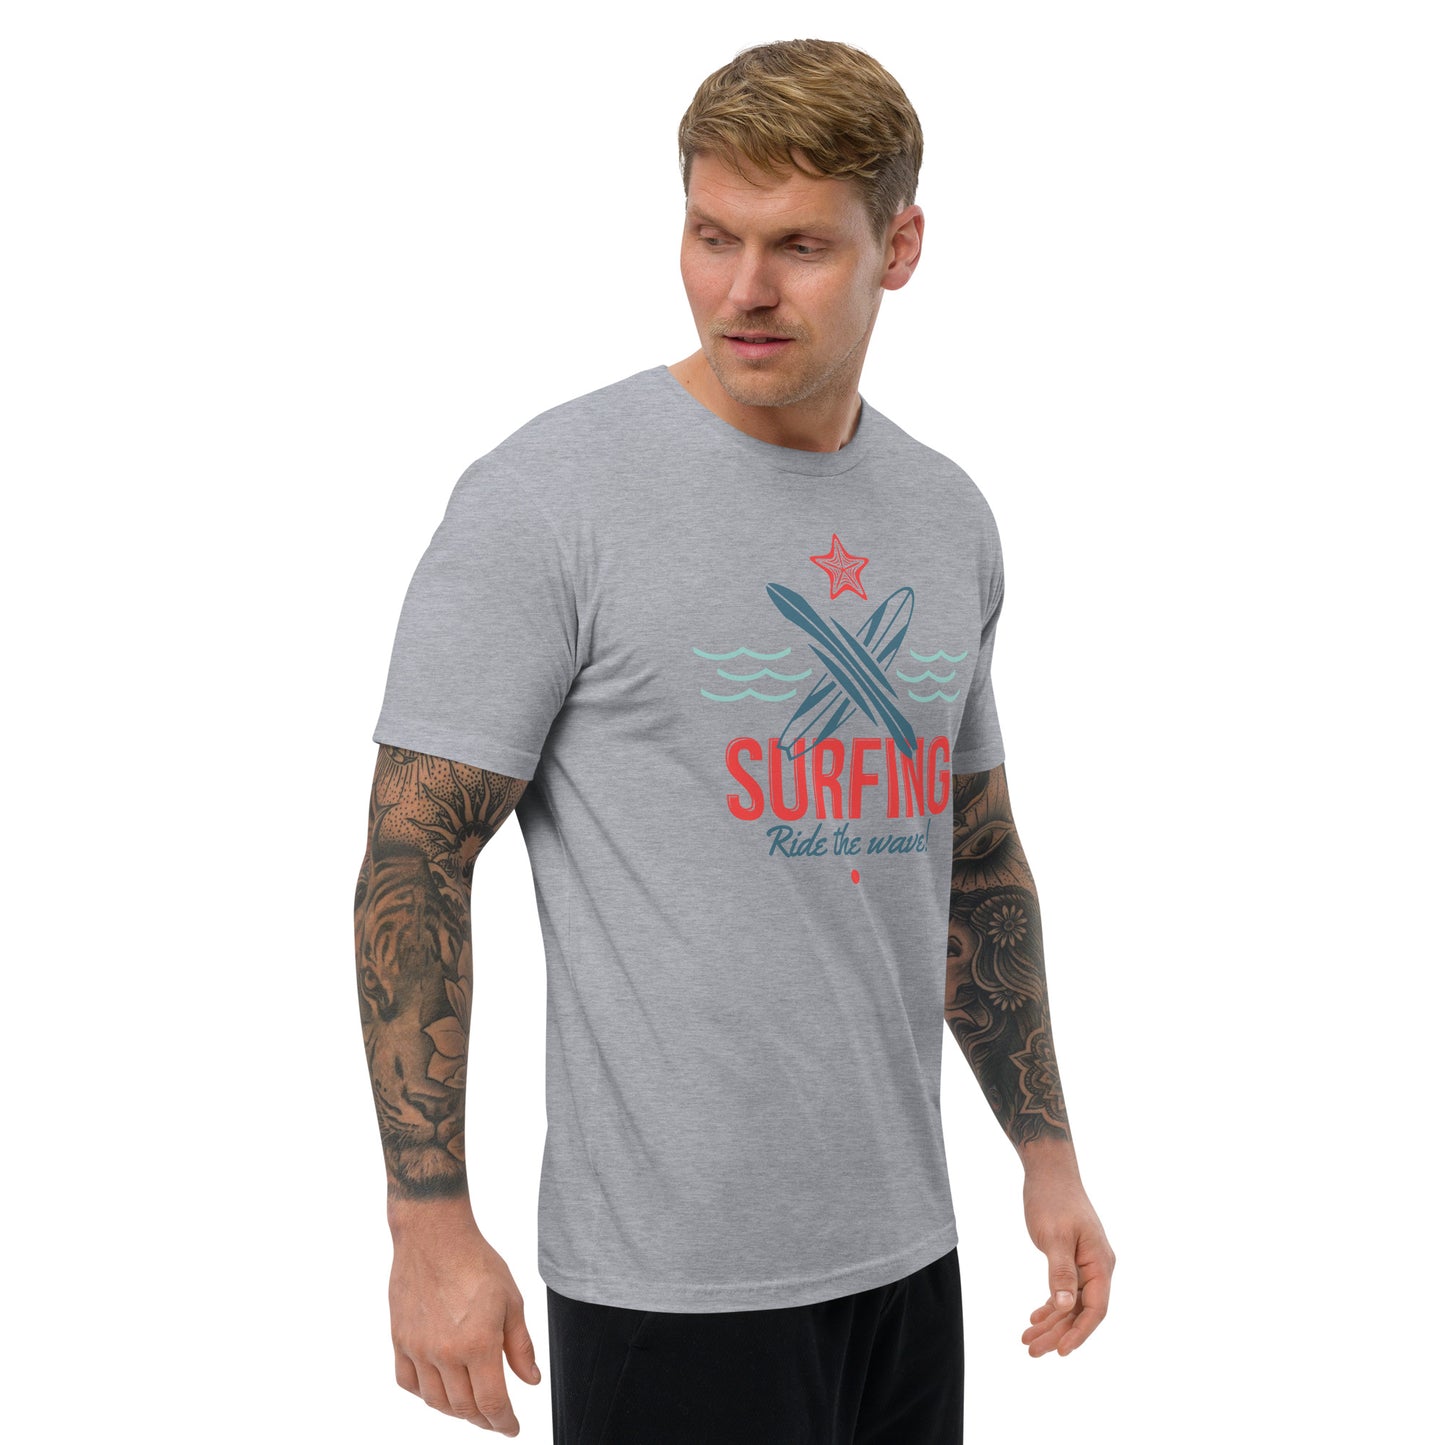 Surfing Ride The Wave Short Sleeve T-shirt